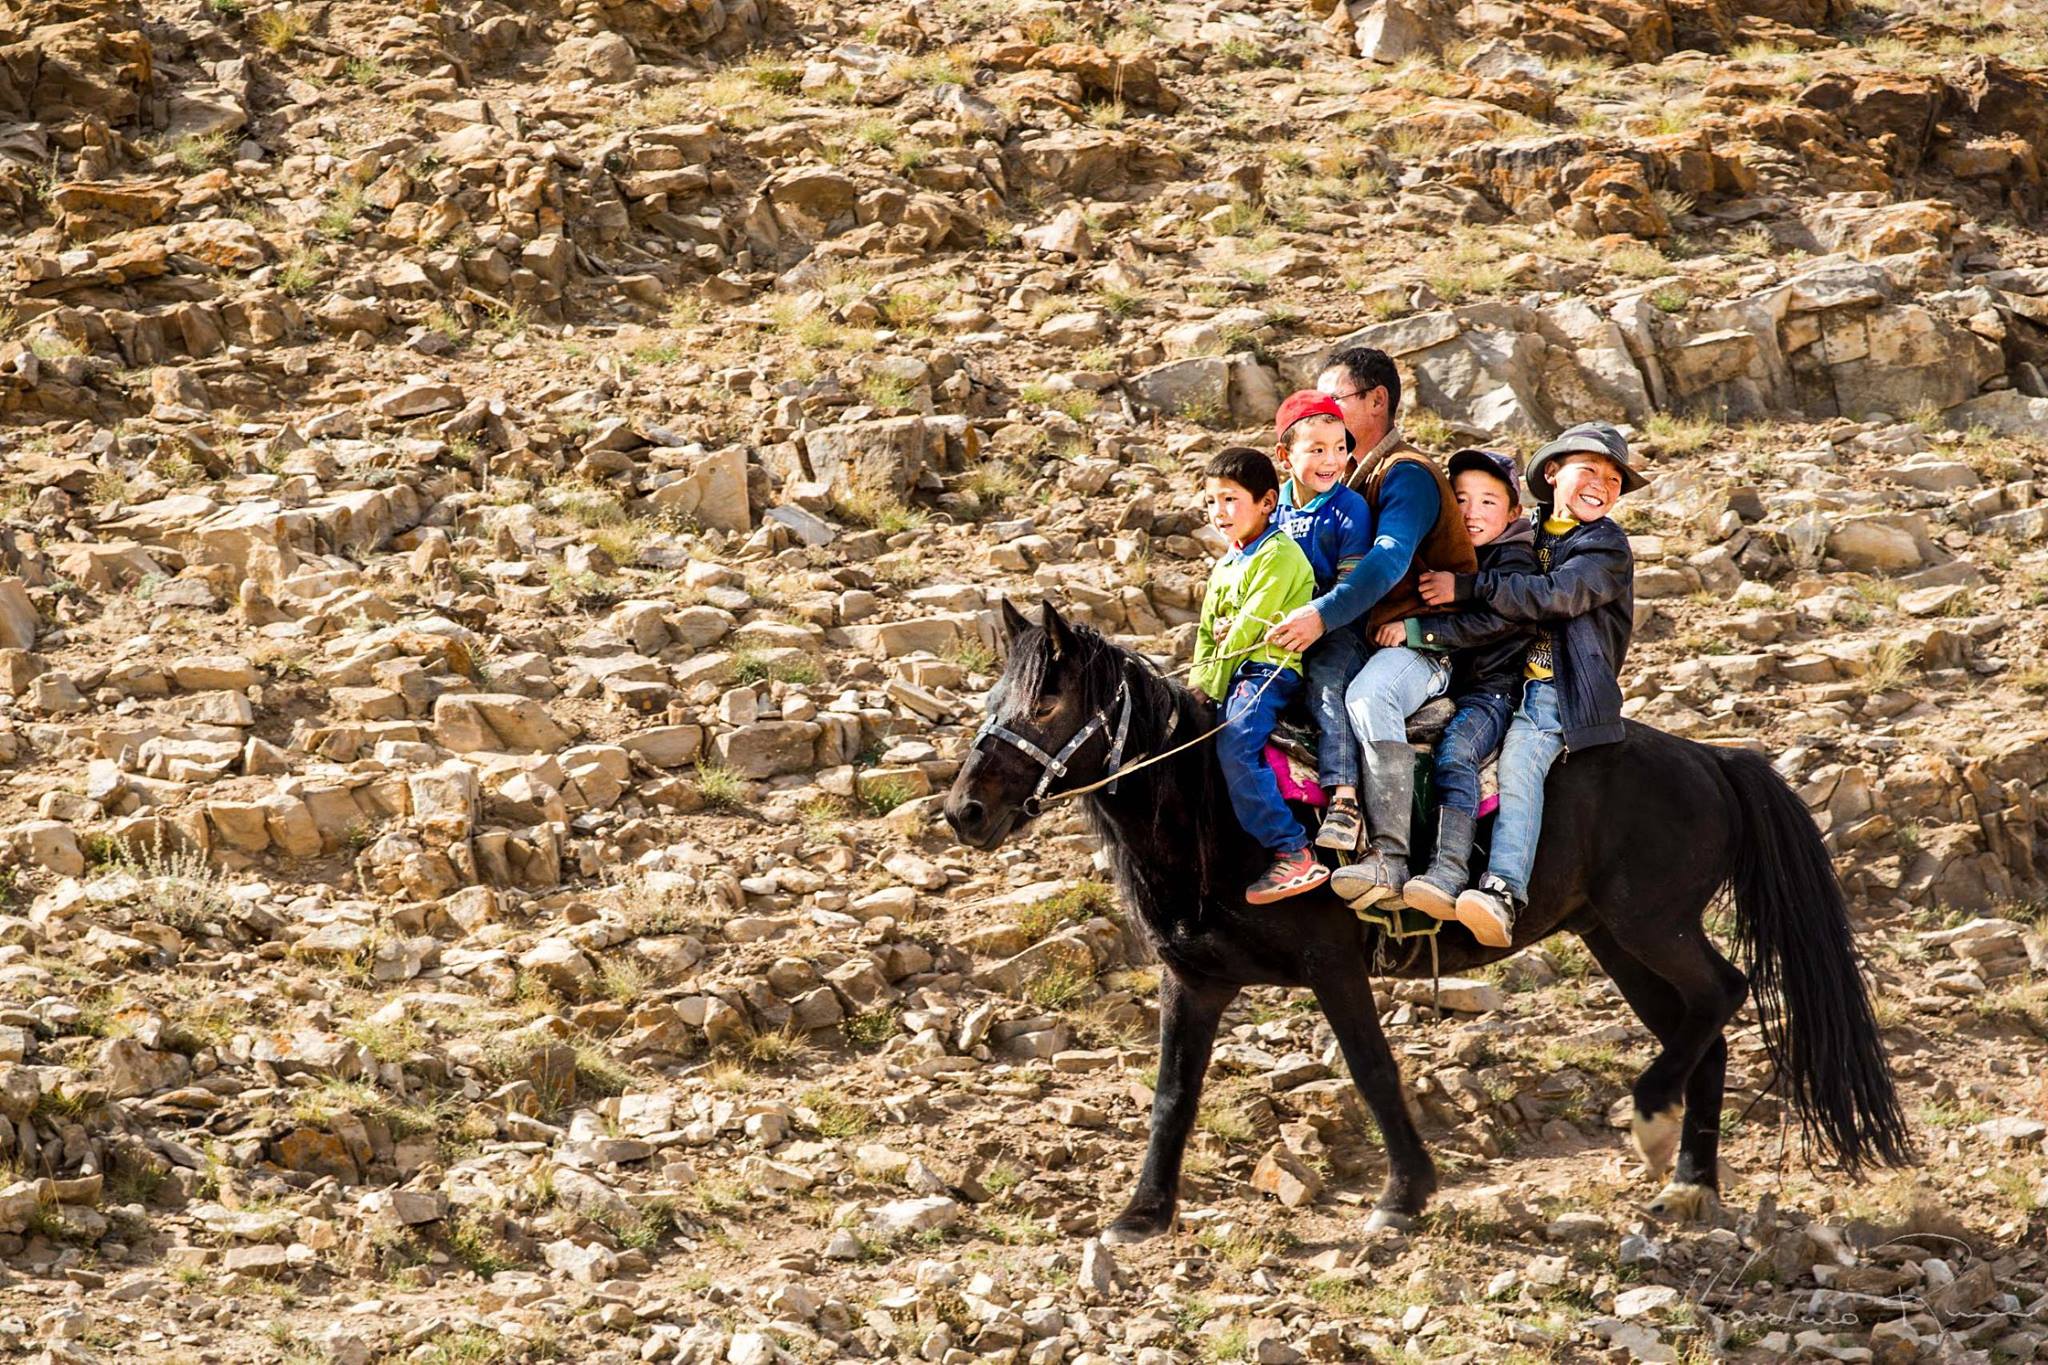 Local children getting a lift on a horse in Mongolia